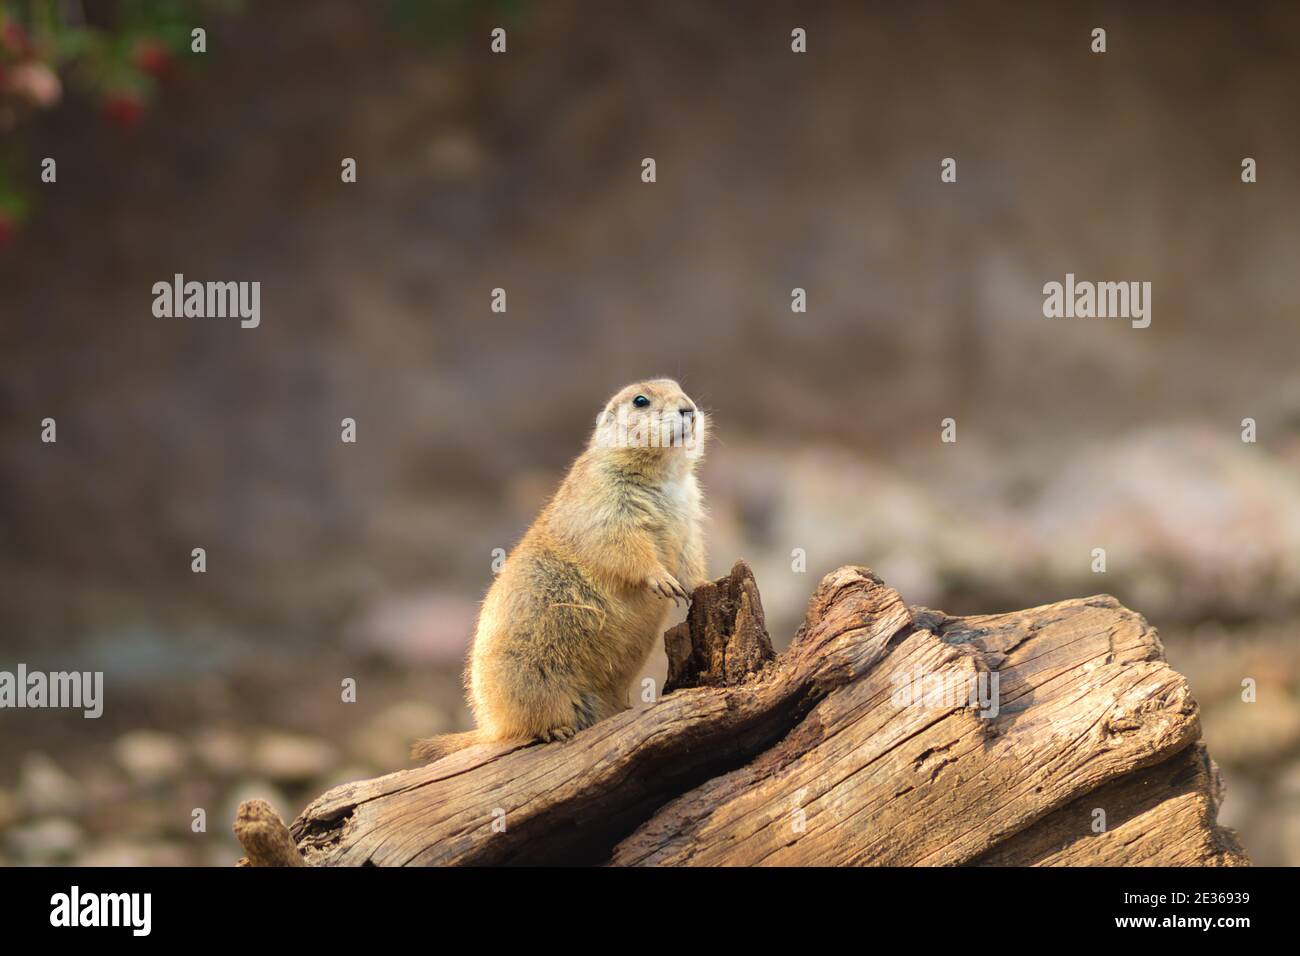 Black-tailed prairie dog stands on a tree trunk, blurred background Stock Photo